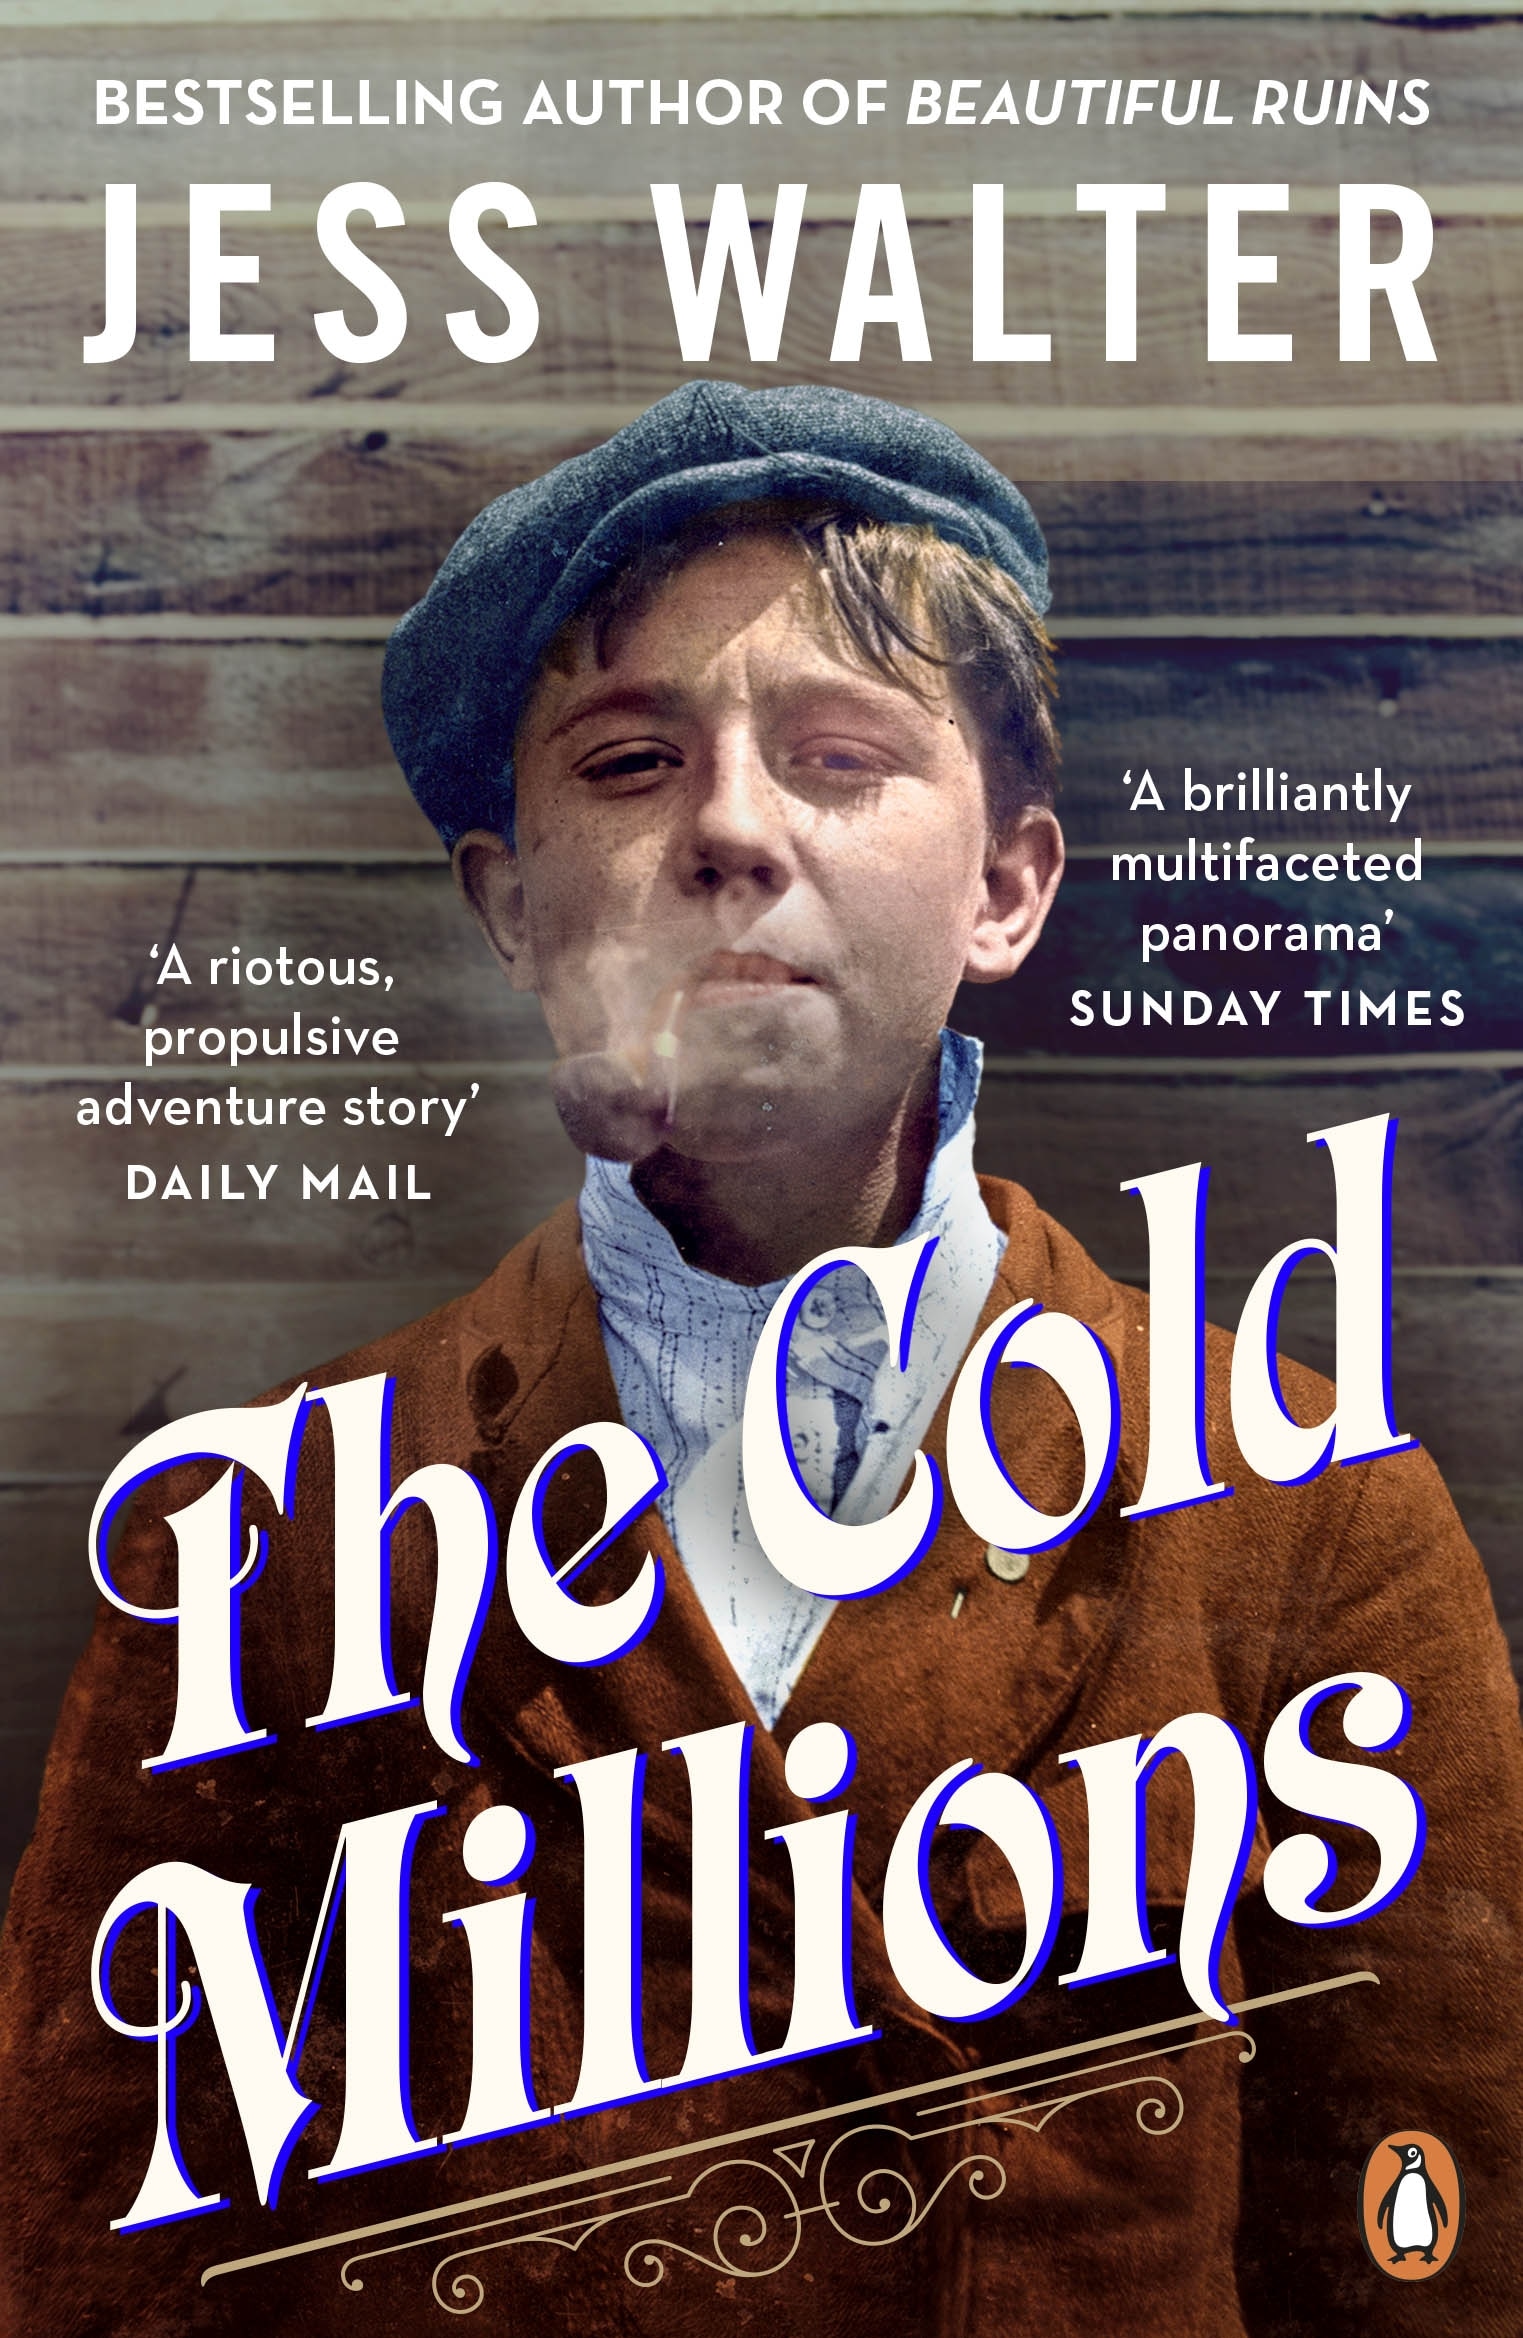 Book “The Cold Millions” by Jess Walter — February 10, 2022